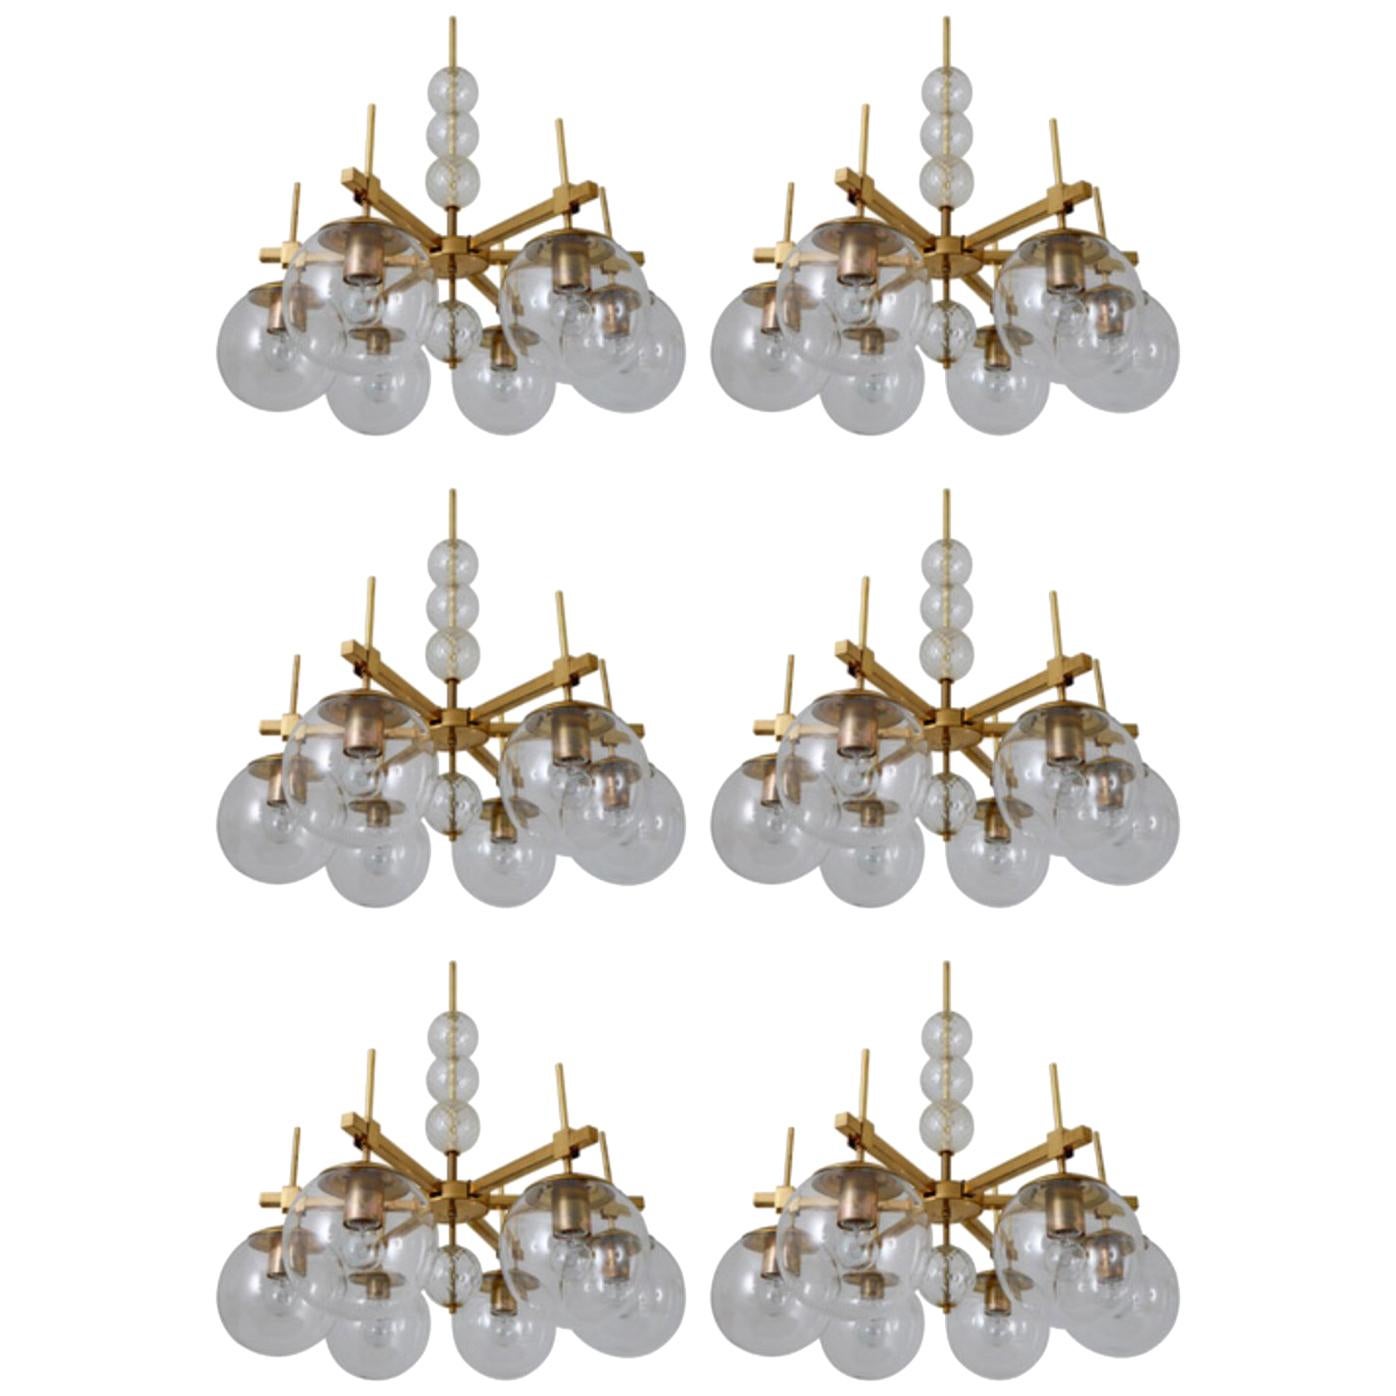 Six Midcentury Chandeliers with Brass Fixture and Hand-Blown Glass, Europe